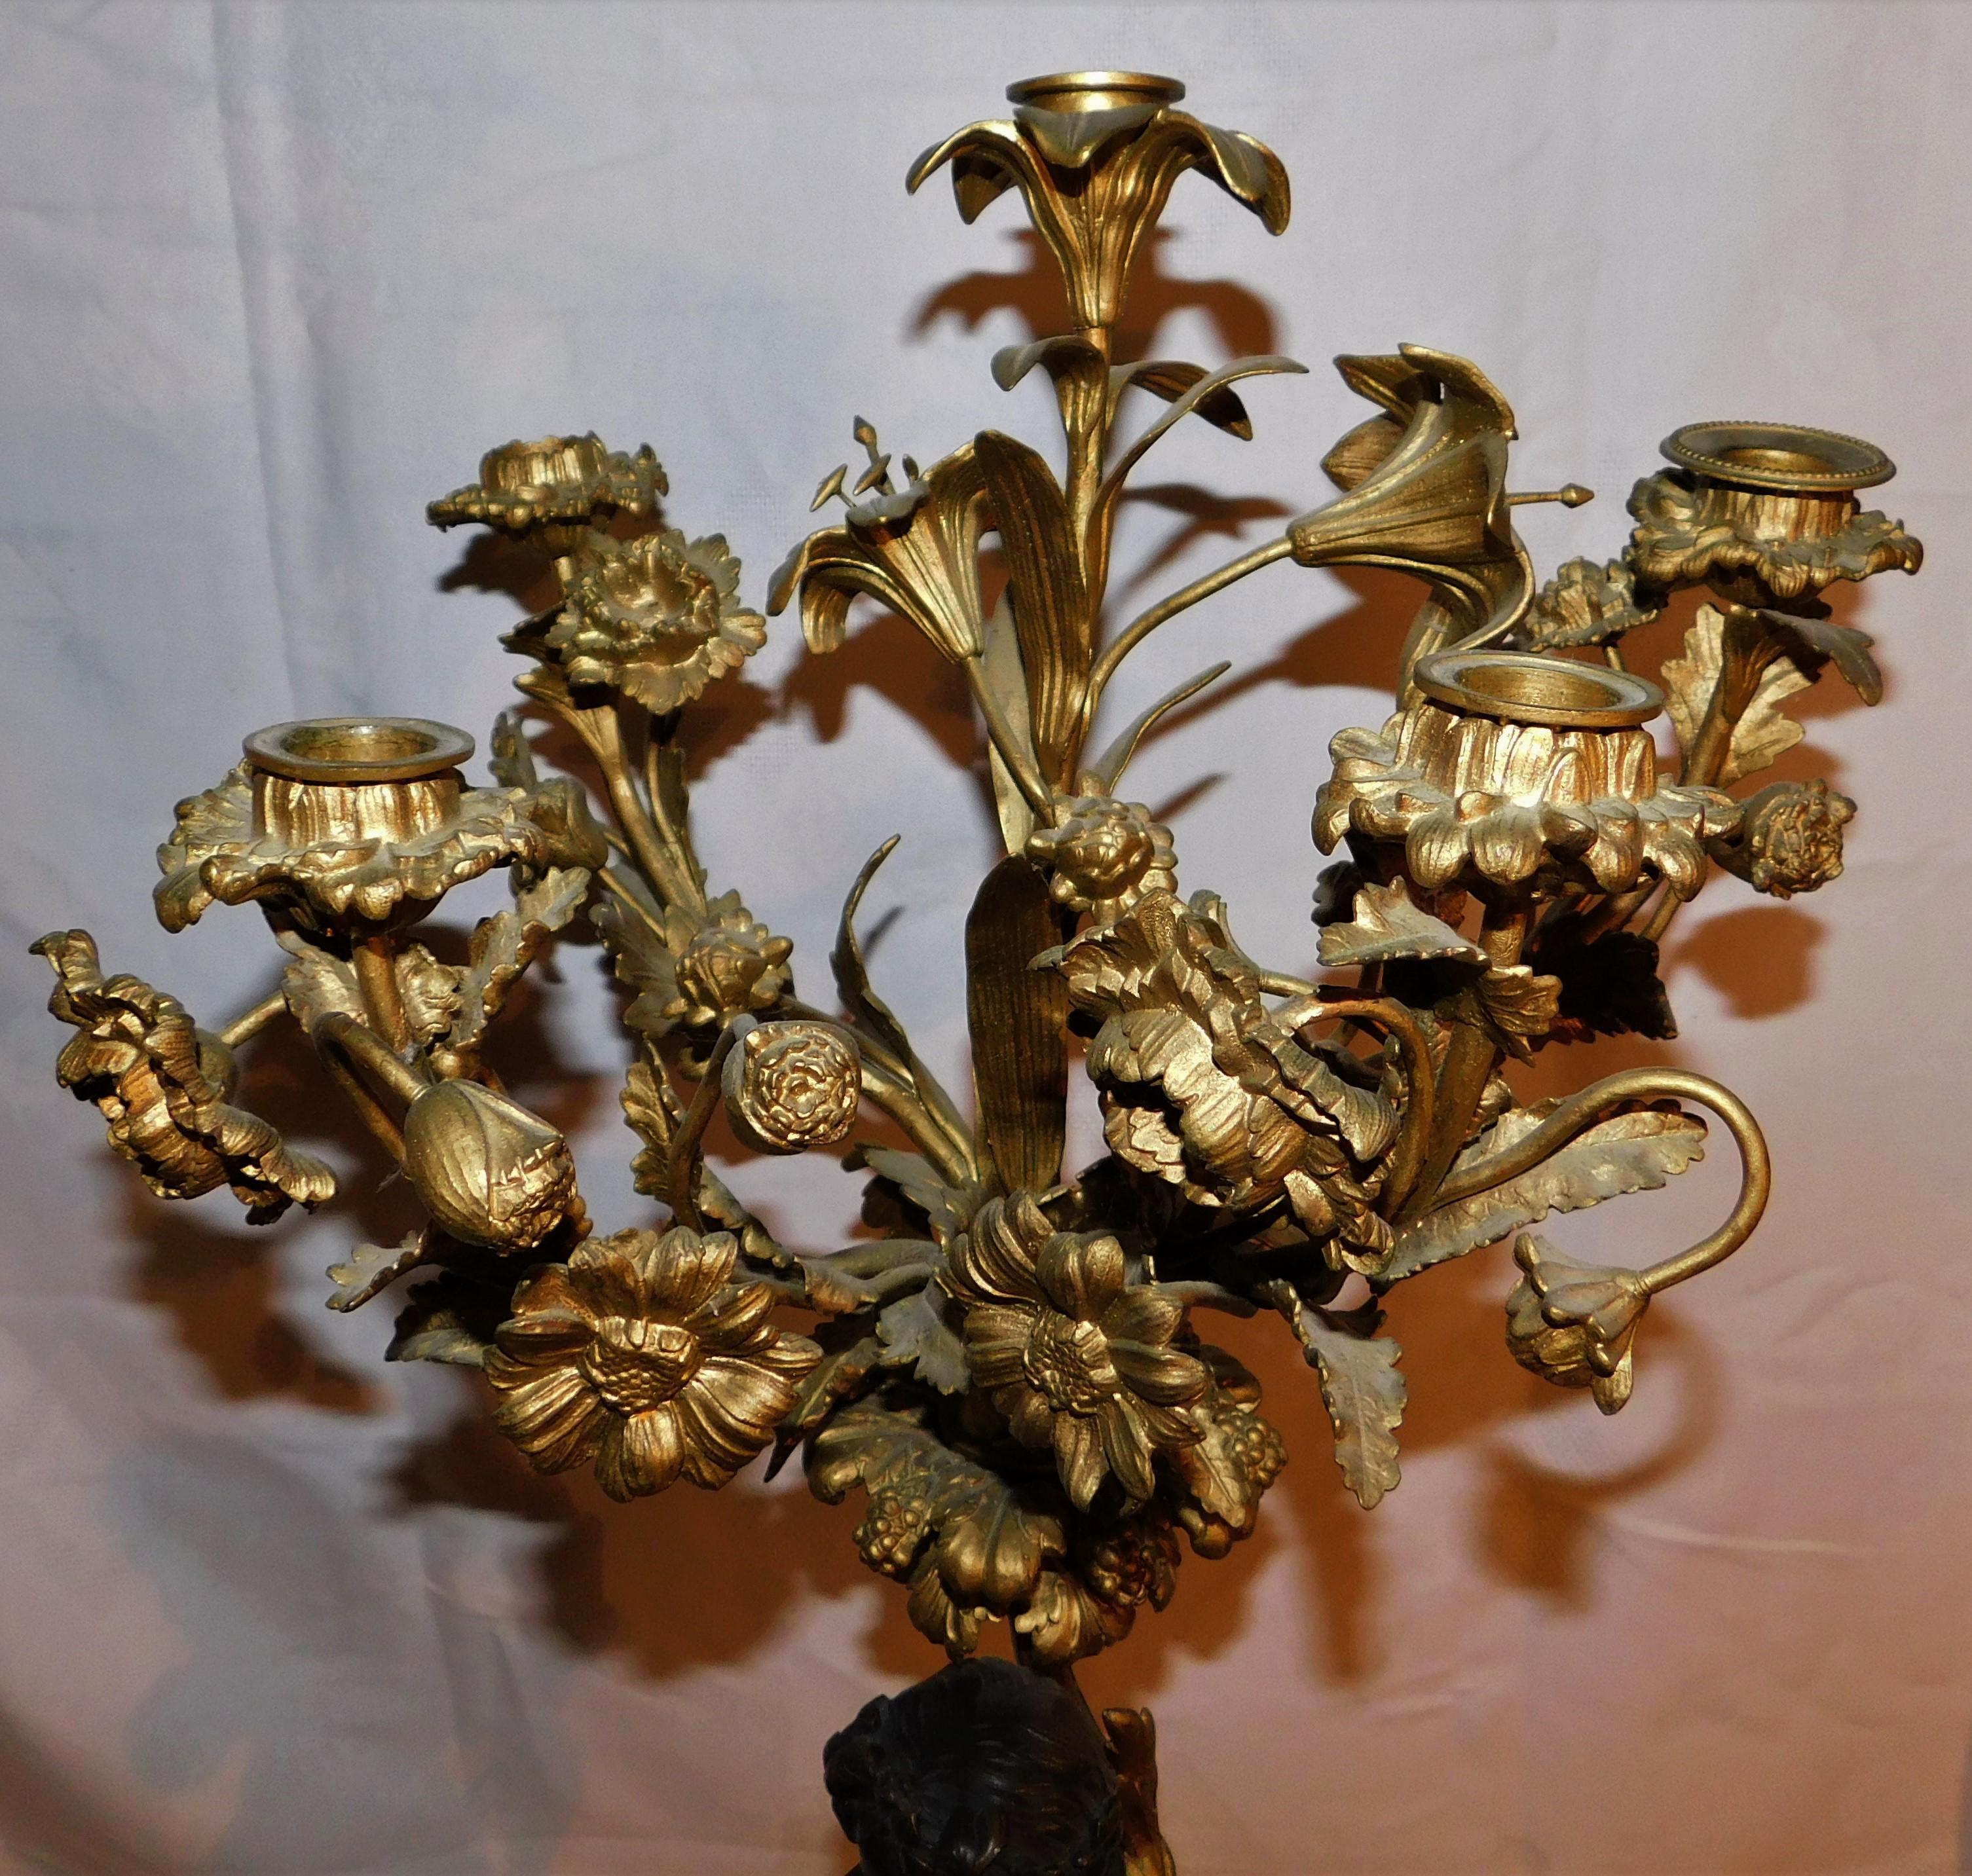 Pair of 19th Century French Gold Gilded Bronze Putti Cherubs Candelabras In Good Condition For Sale In Hamilton, Ontario